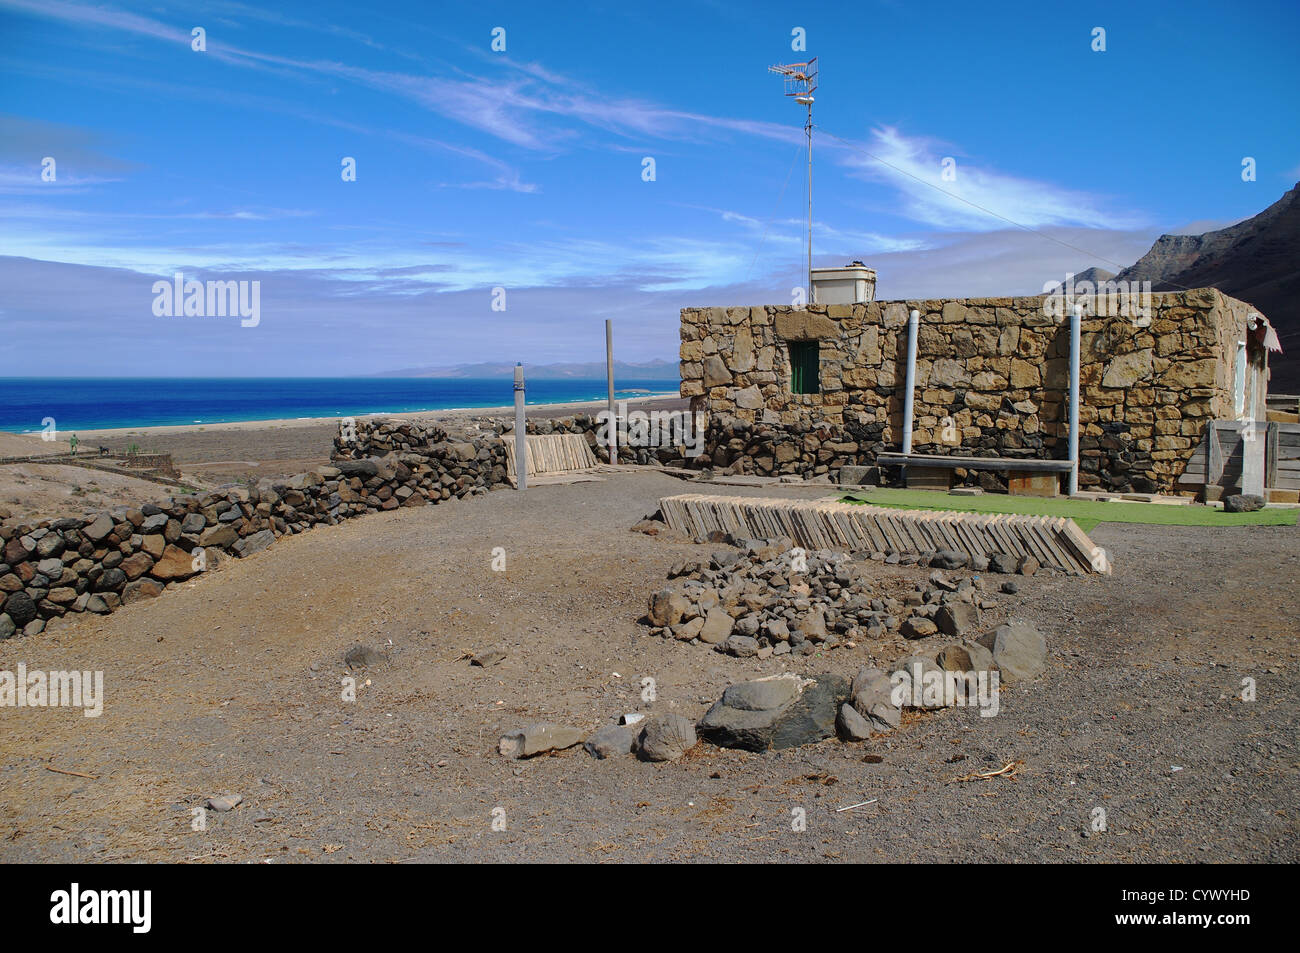 A stone cottage at the Atlantic Ocean on October 24, 2011 in Cofete, Fuerteventura Island, Spain Stock Photo